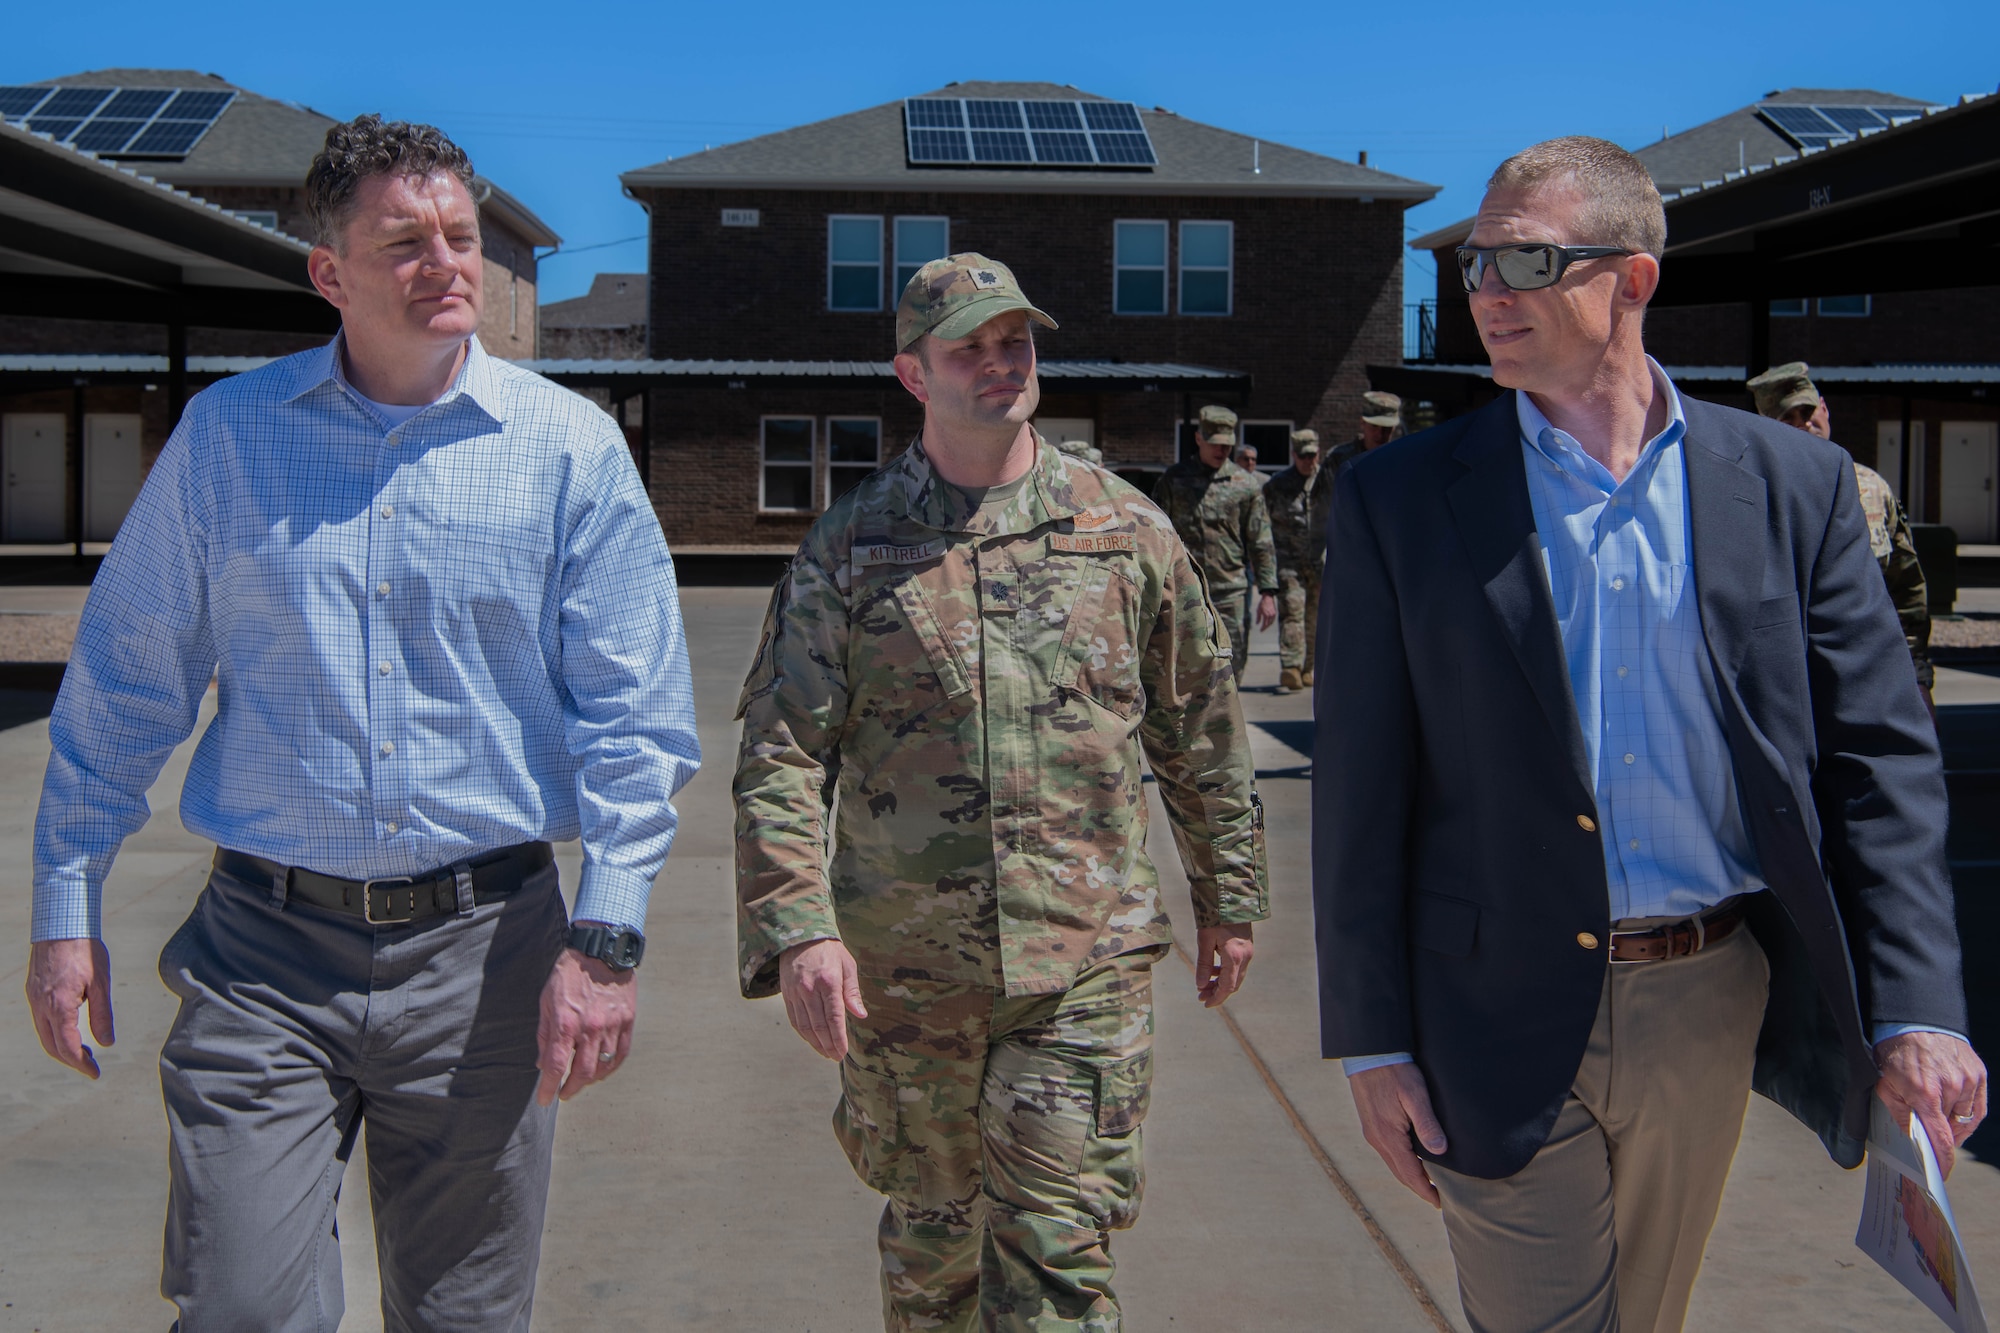 Honorable Christopher Maier, Assistant Secretary of Defense for Special Operations and Low Intensity Conflict, walks with U.S. Air Force Lt. Col. Michael Kittrell, 27th Special Operations Mission Support Group deputy commander, and Mr. Brenner Campbell during a visit to the Sendero, L.L.C., off-base dormitory in Clovis, N.M., April 3, 2024. The off-base Sendero, L.L.C., housing development is the first Air Force public-private lease, bridging Cannon AFB’s need for single Airmen housing availability by providing 200 additional beds and relieving pressure on the local multi-family housing market – increasing quality of life for Cannon’s Air Commandos. (U.S. Air Force photo by Staff Sgt. Vernon Walter)